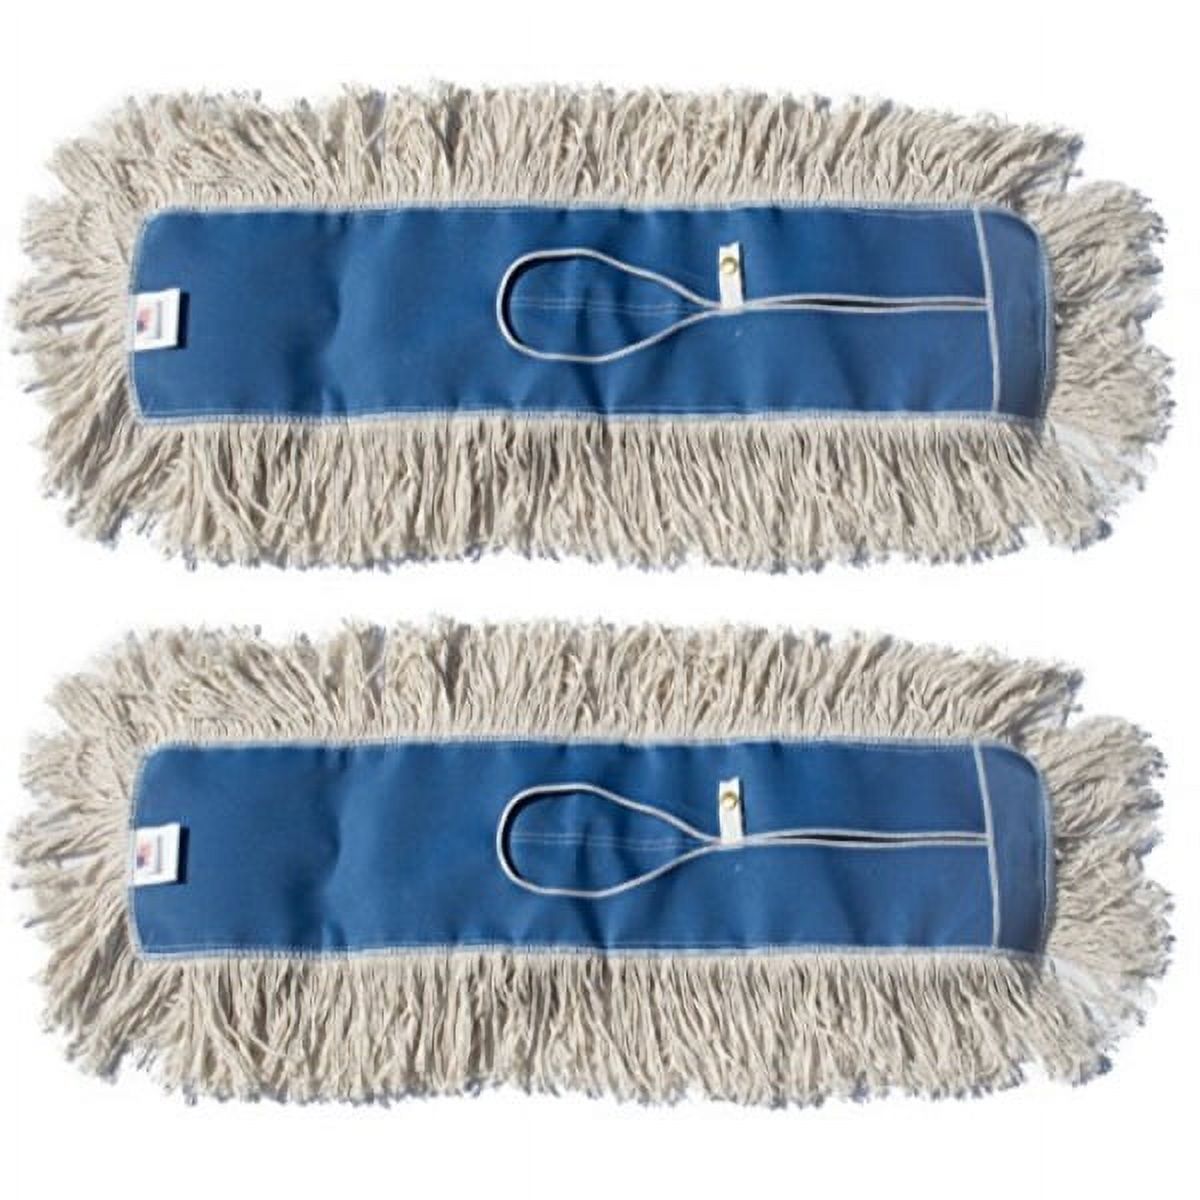 nine forty industrial | commercial usa cotton floor dust mop head refill | replacement (2 pack, 24" wide x 5") - image 1 of 8